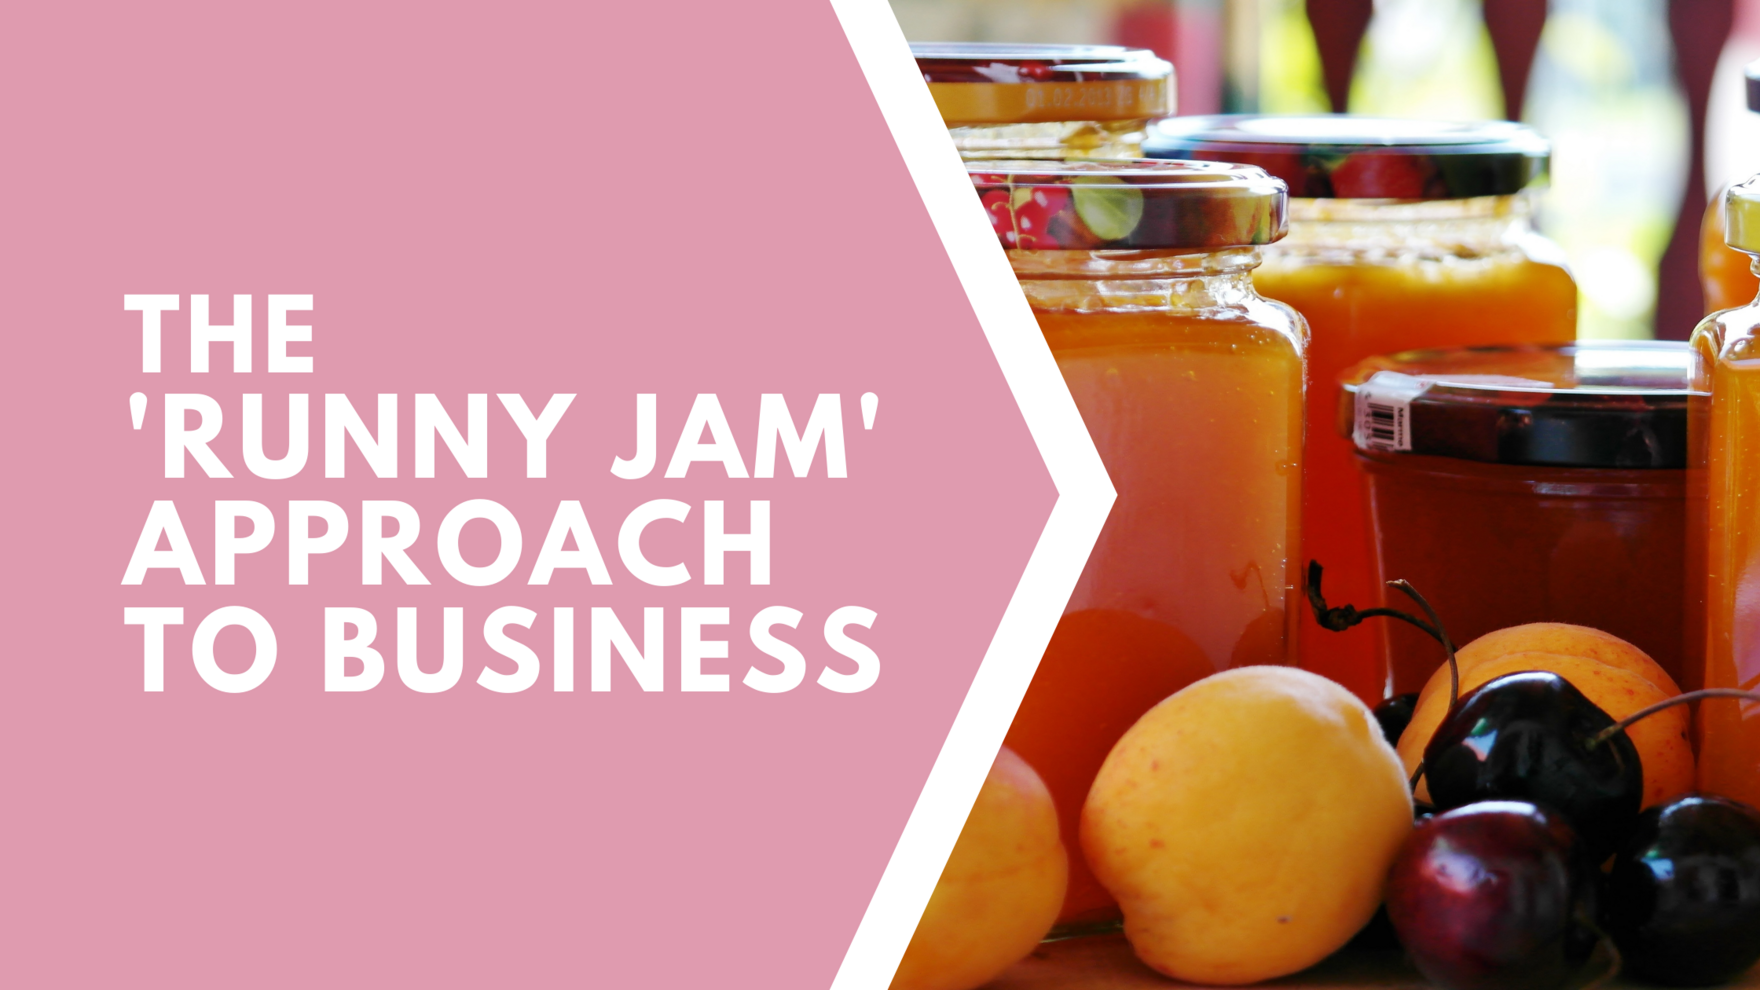 THE  'RUNNY JAM' APPROACH TO BUSINESS